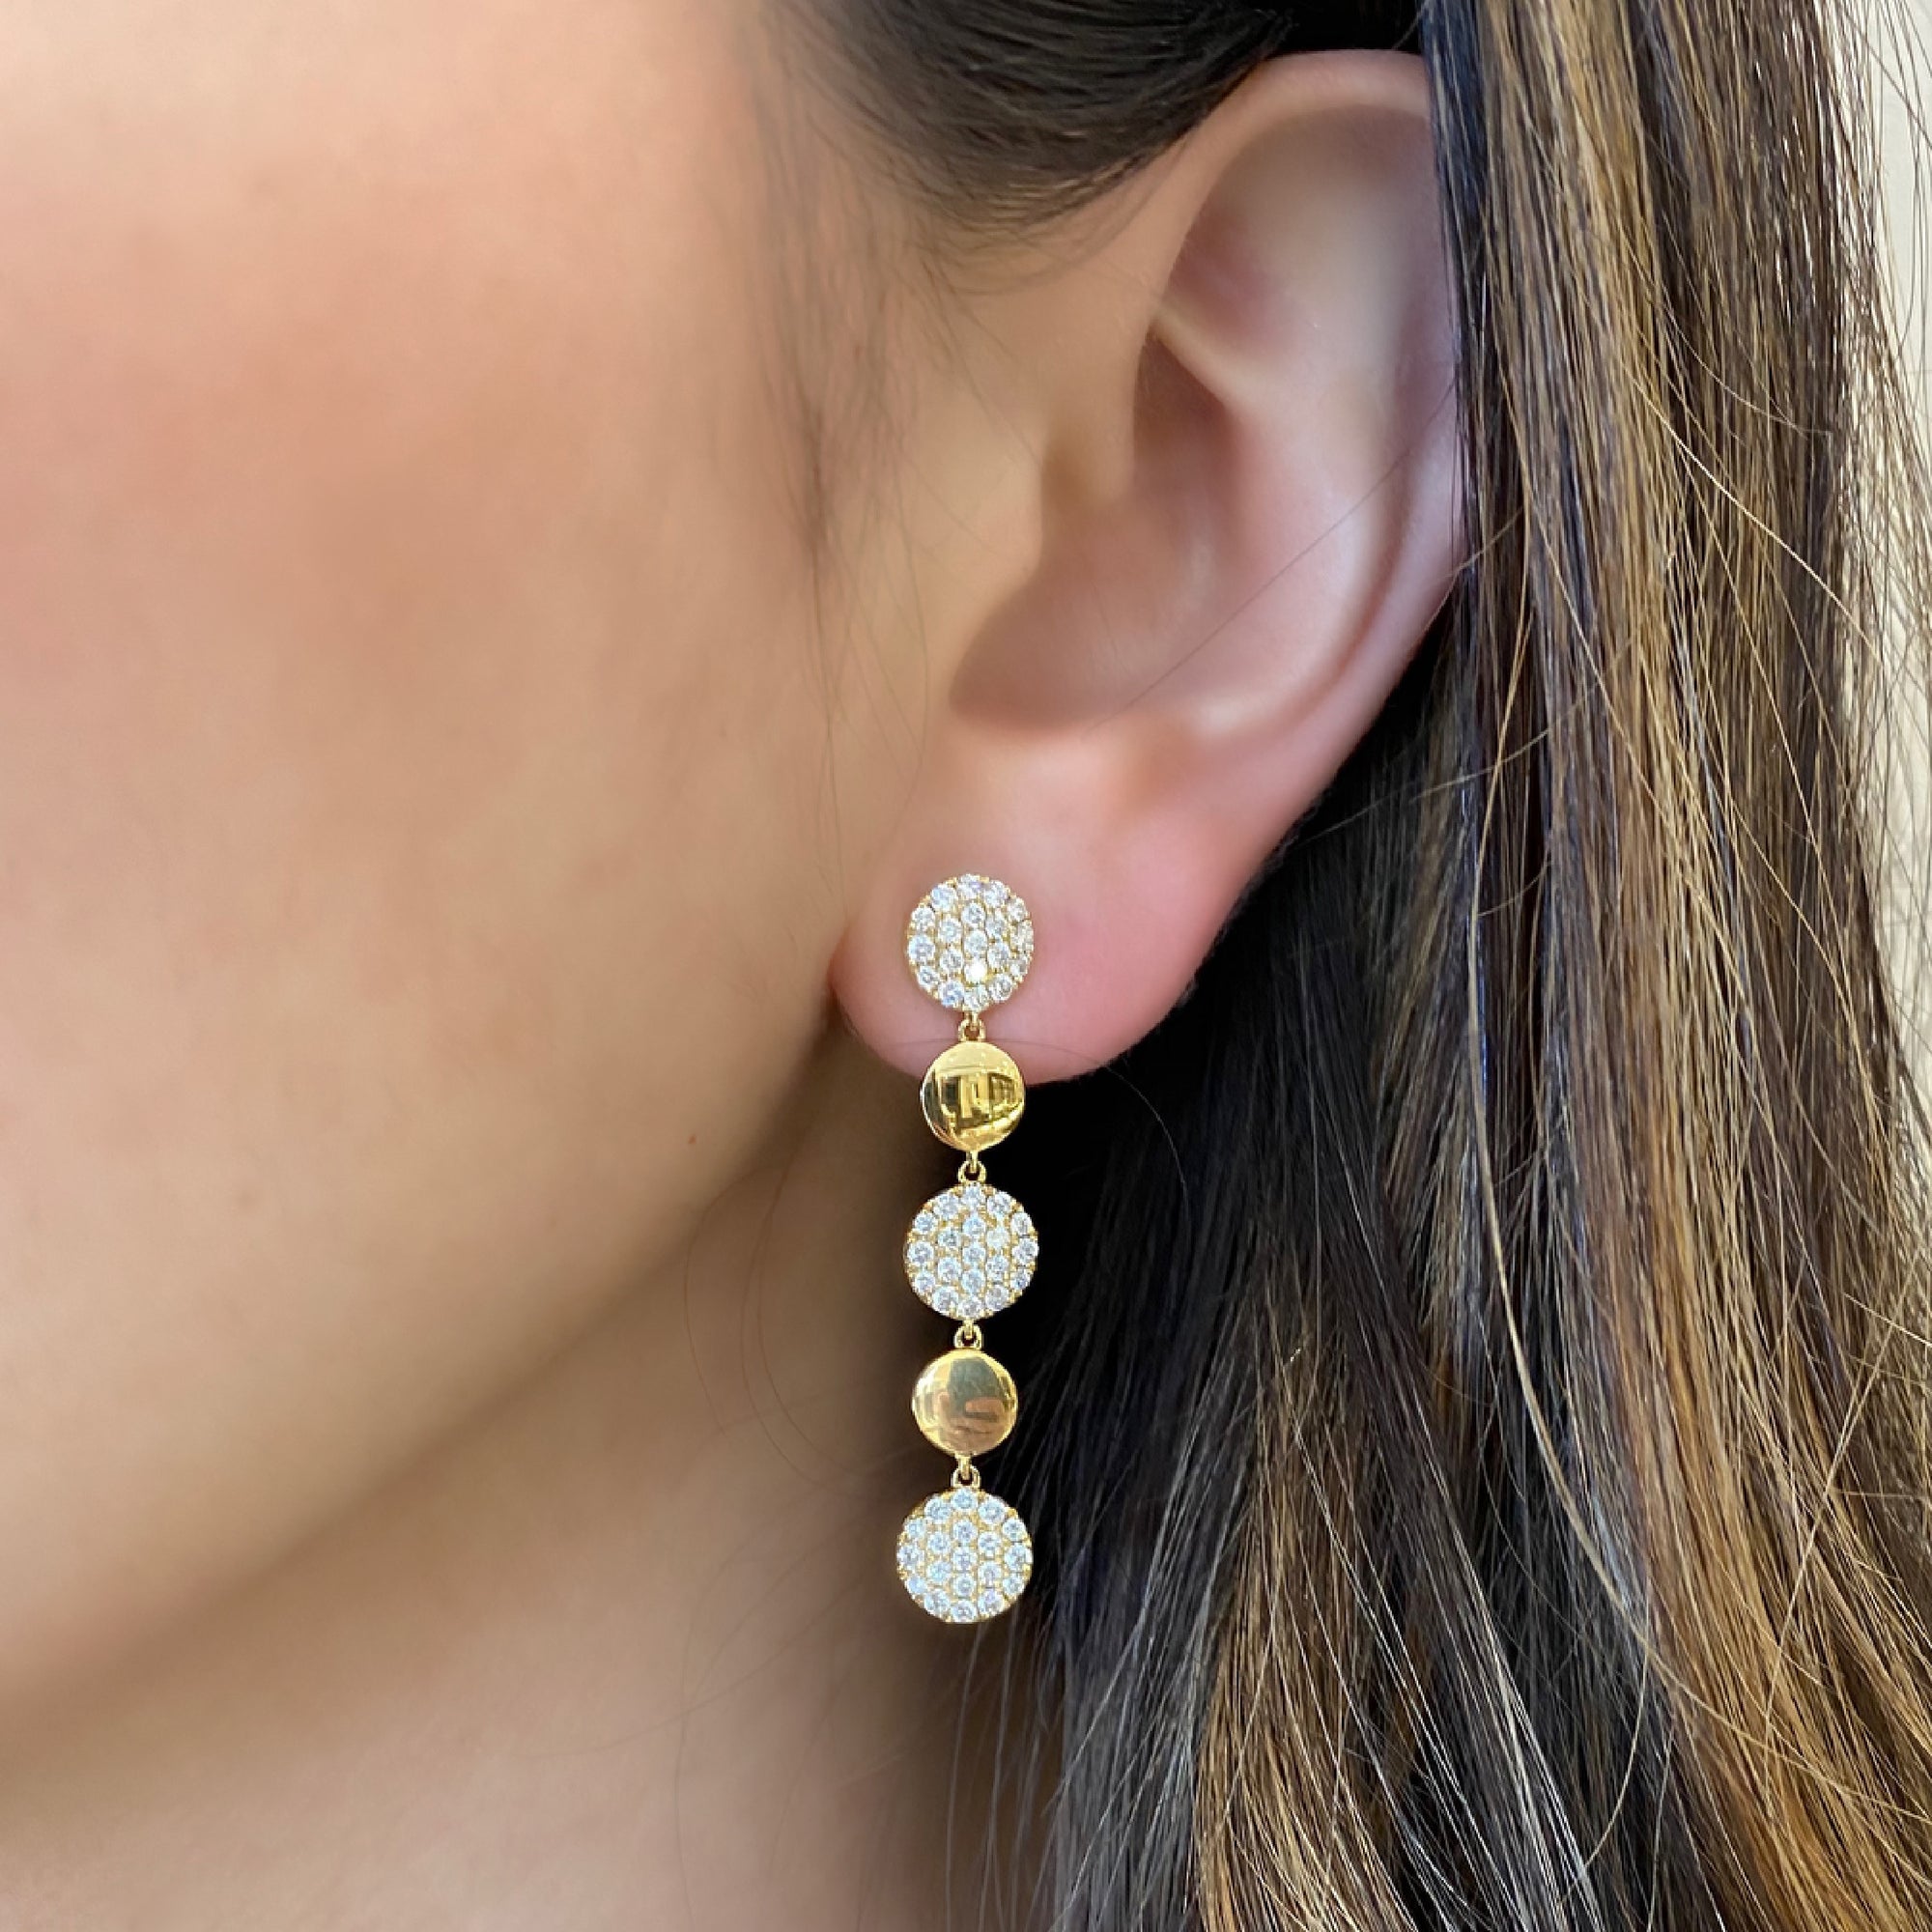 Pave Diamond Disc Dangle Earrings  -18K gold weighing 5.20 grams  -114 round pave-set diamonds totaling 1.46 carats